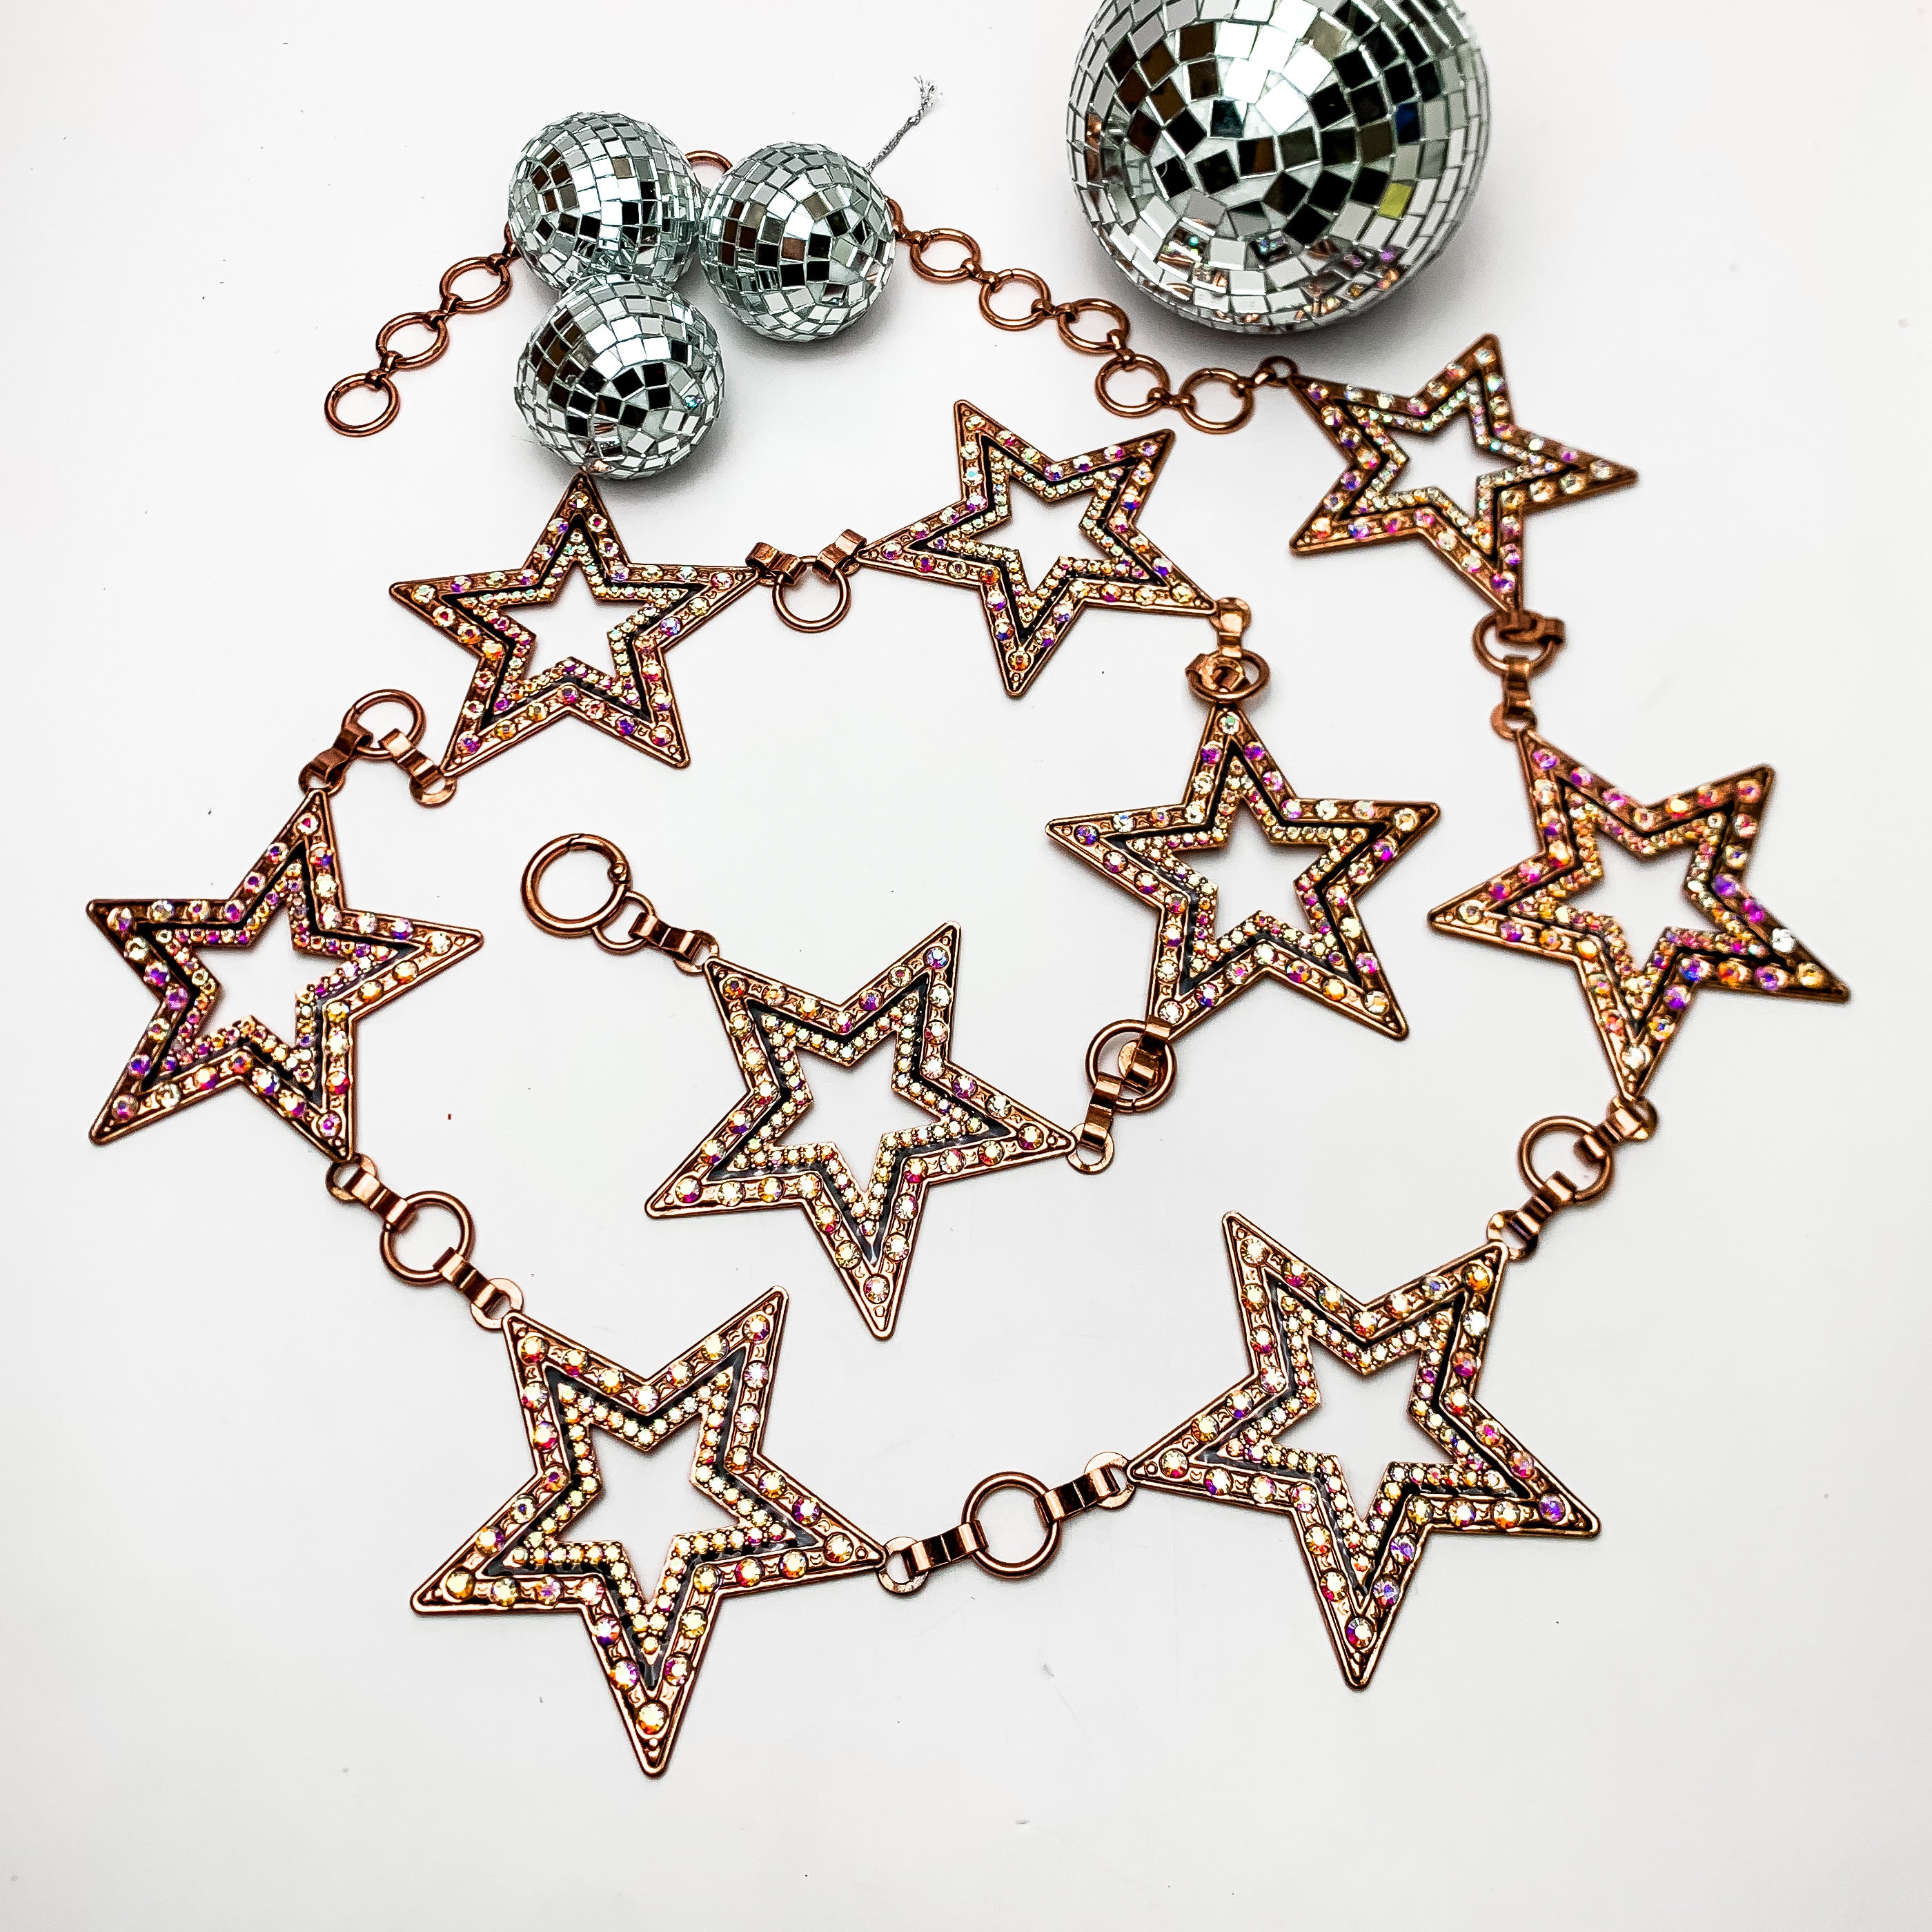 Starlight Adjustable Copper Belt With Ab Crystals. This belt is on a white background with disco balls above them for decoration.